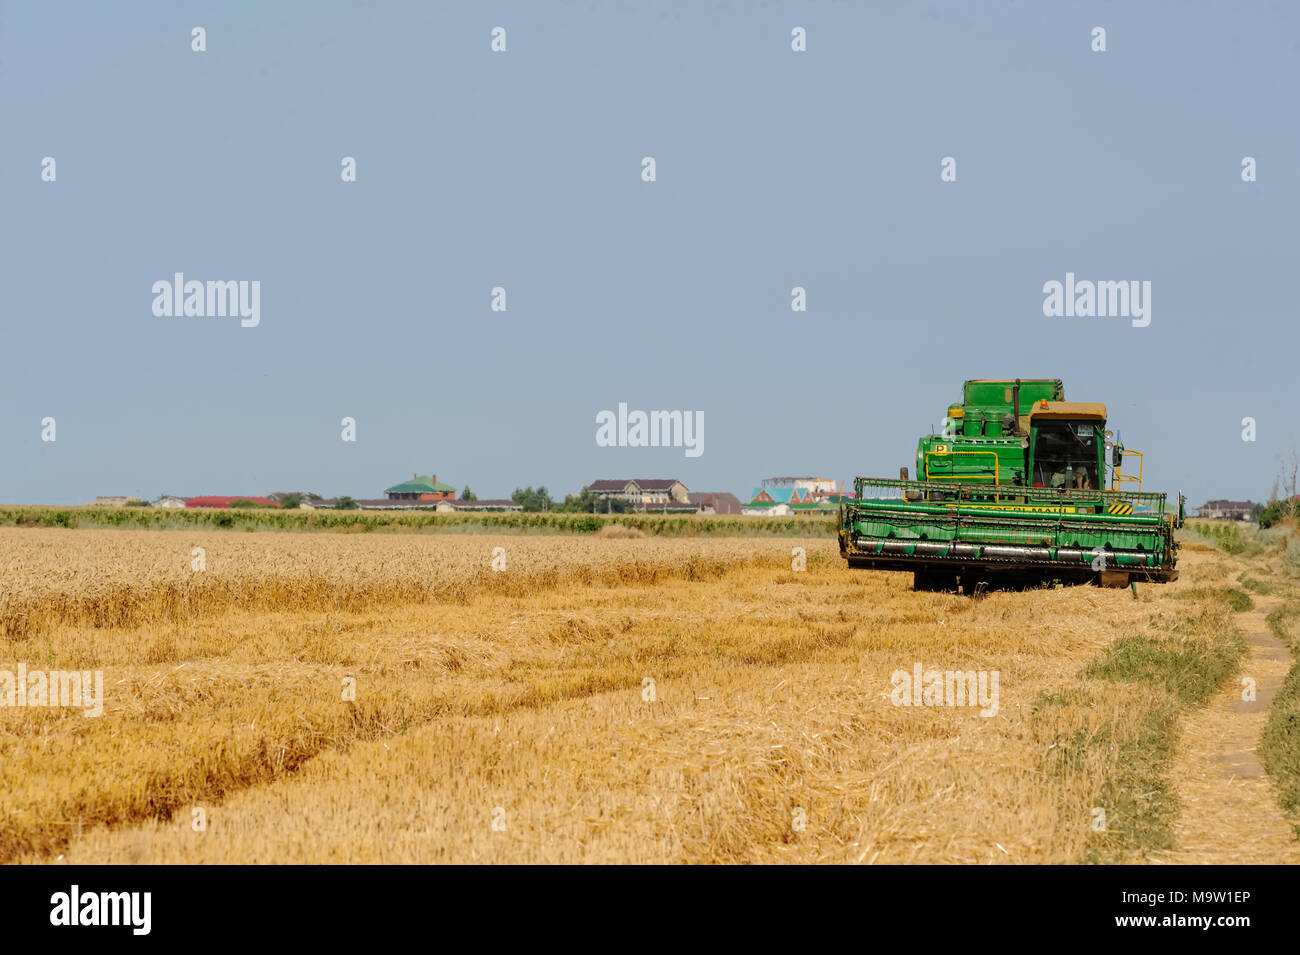 Kuchugury, Russia - July 16, 2017: Harvester machine to harvest wheat field working. Combine harvester agriculture machine harvesting golden ripe whea Stock Photo